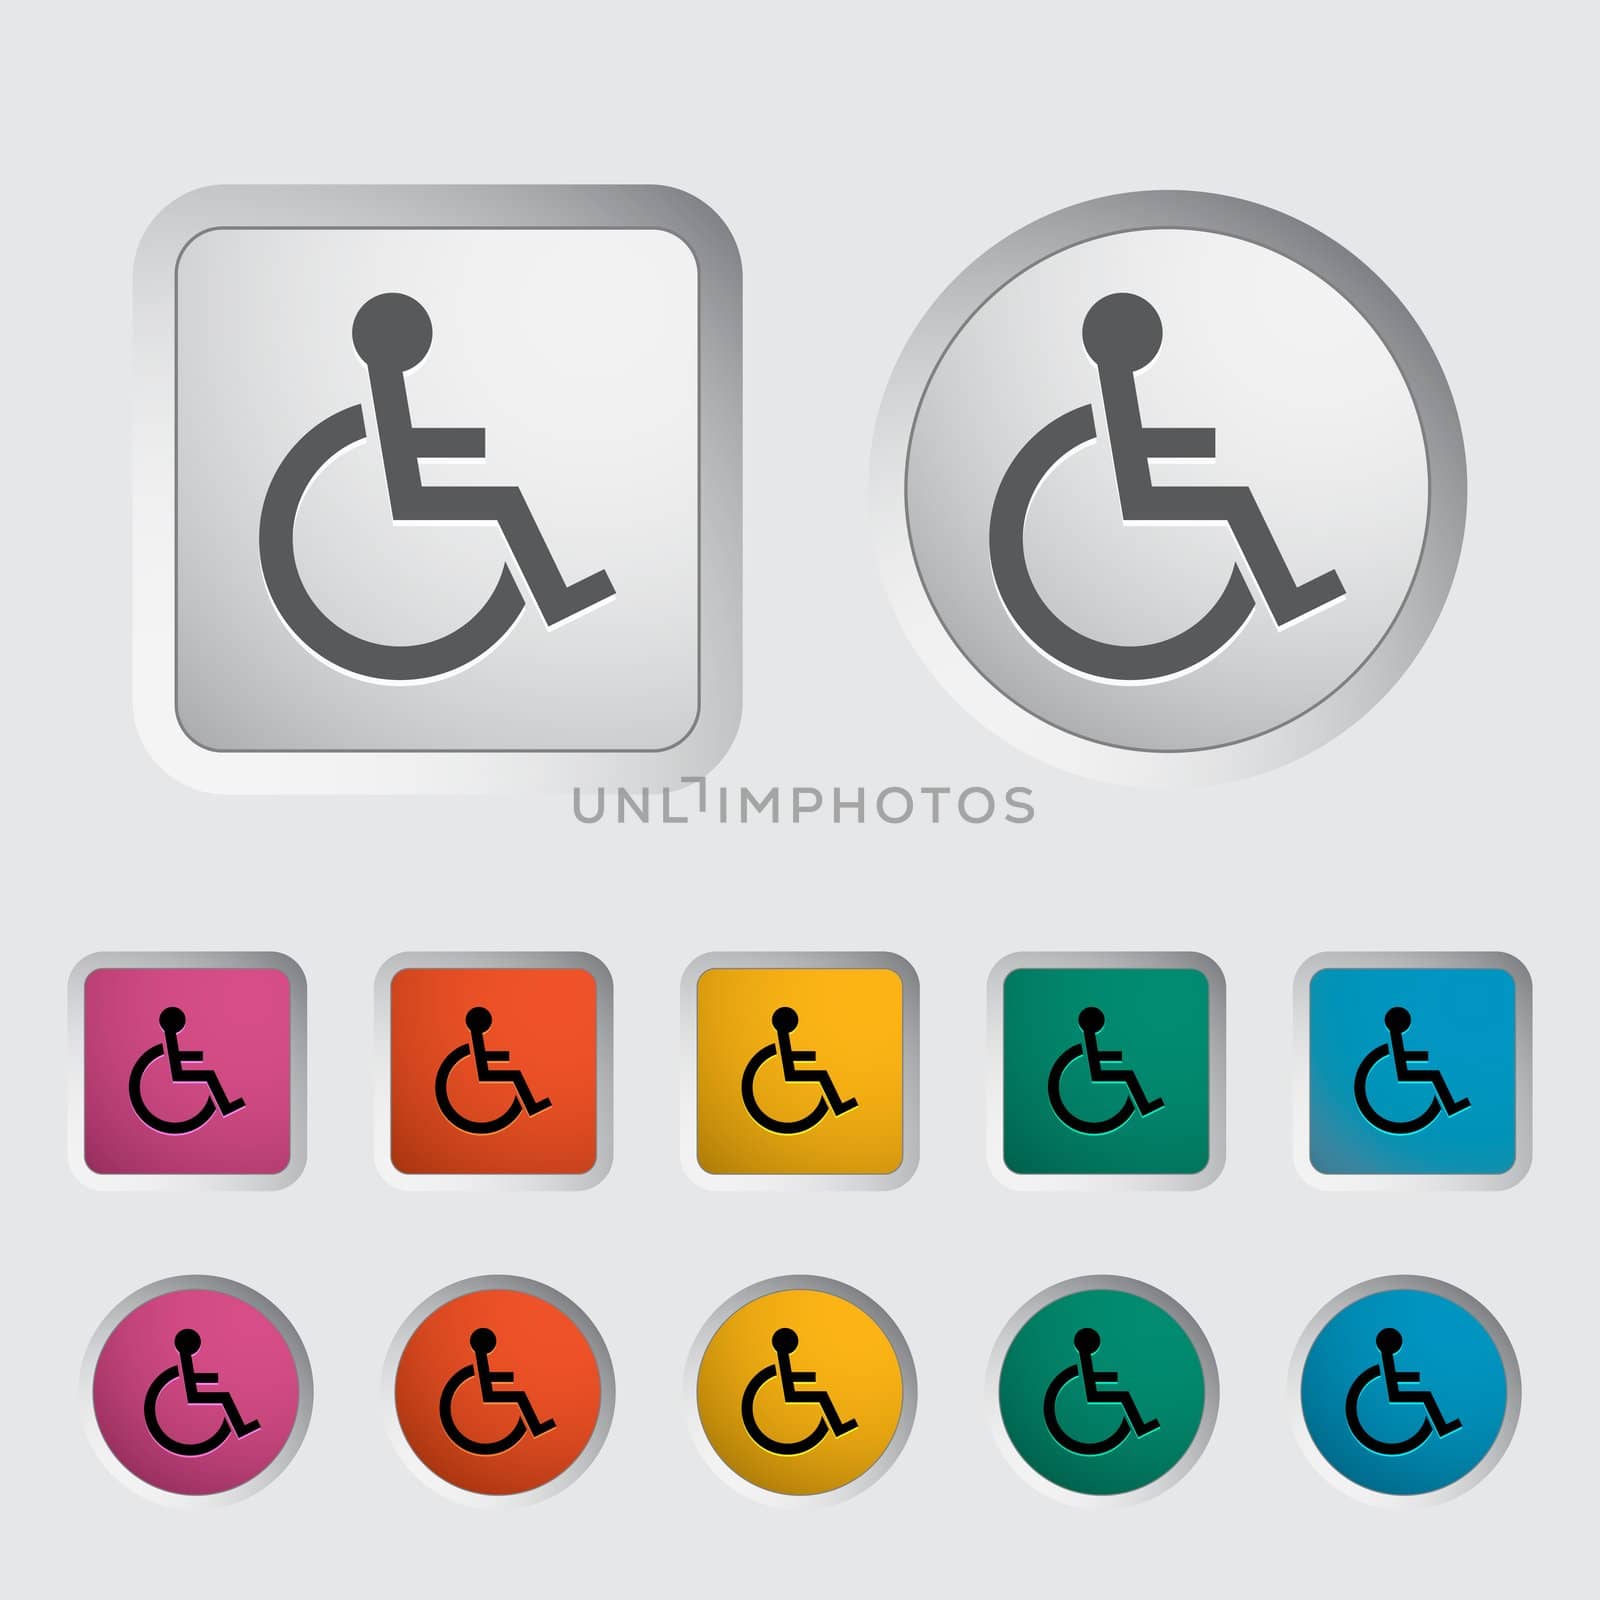 Disabled single icon. Vector illustration.